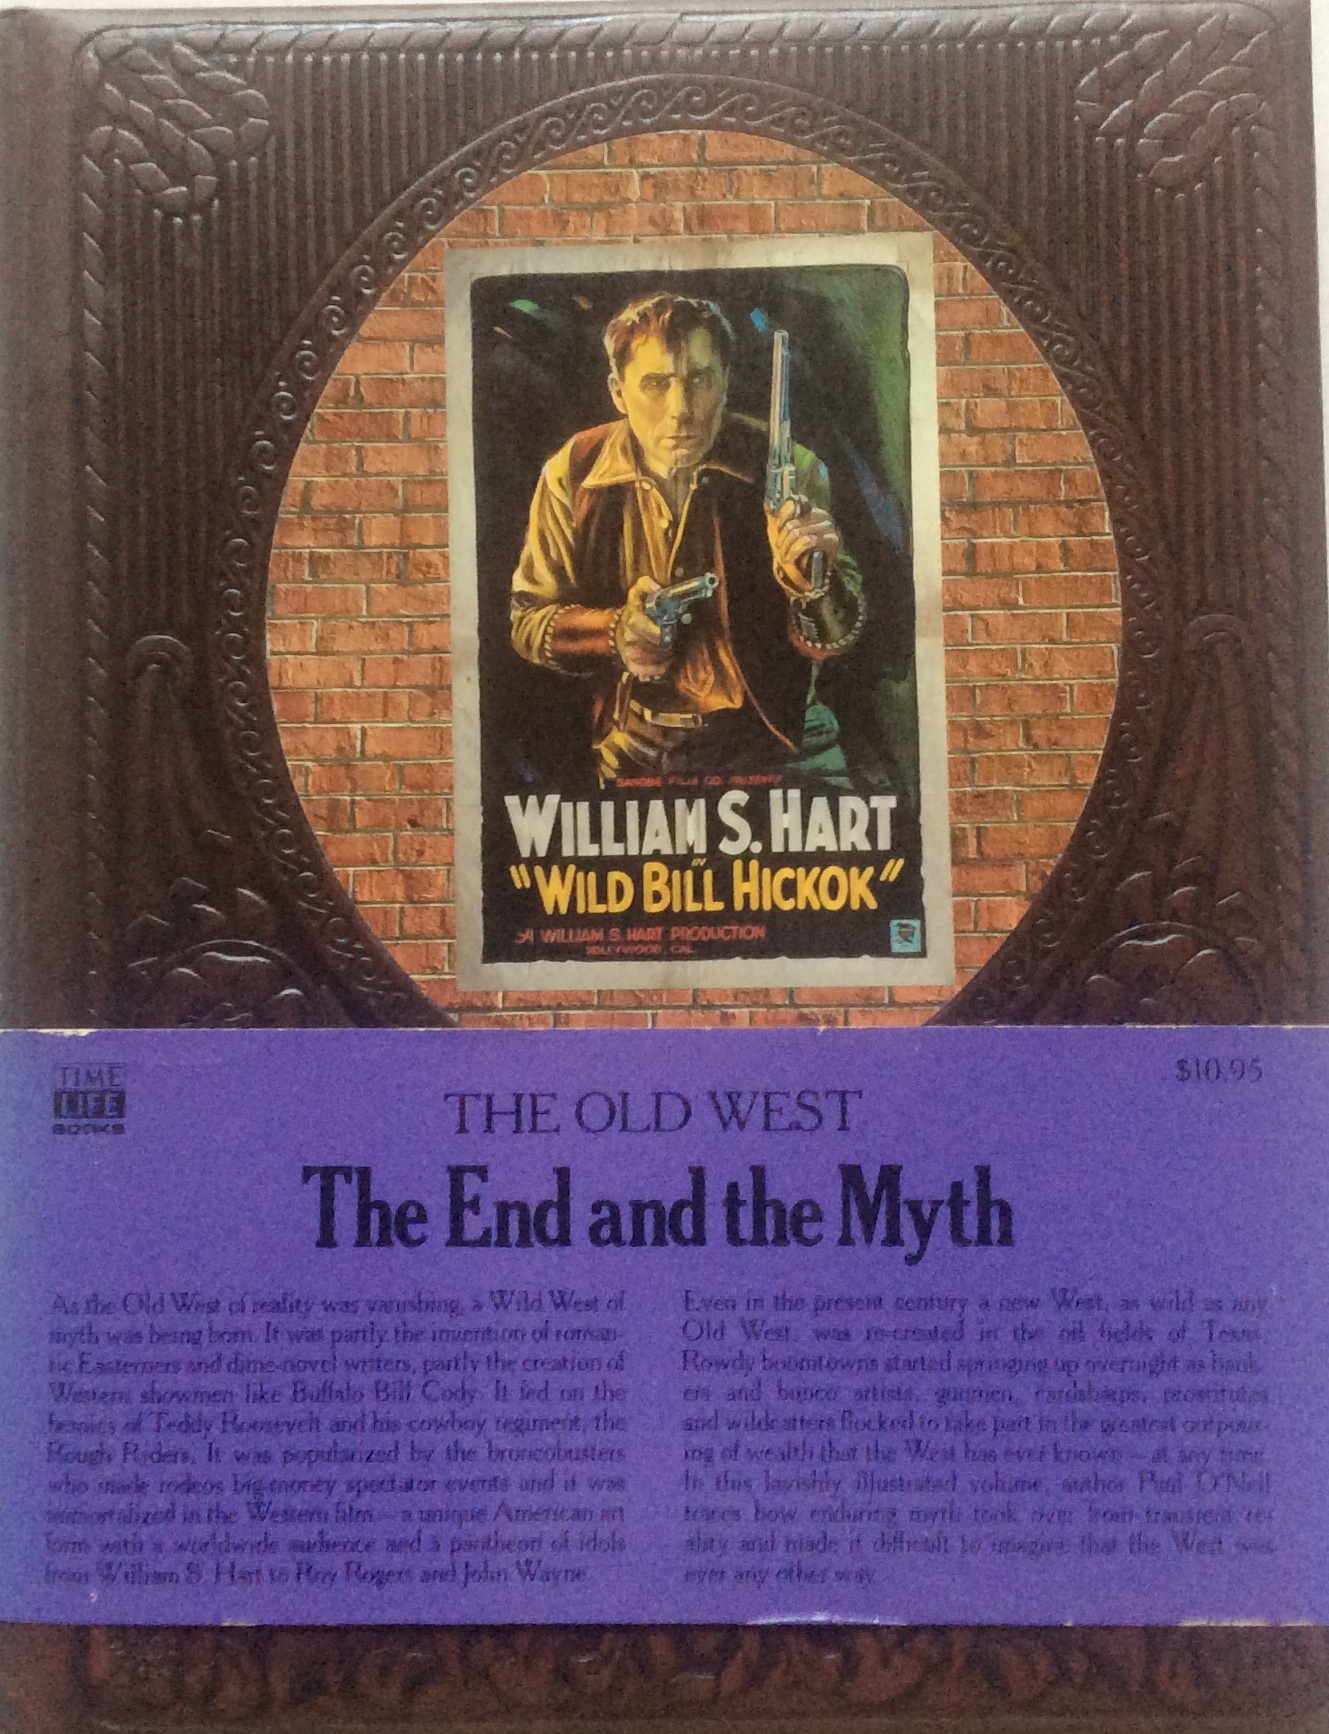 Time life books The old west The end and Myth 